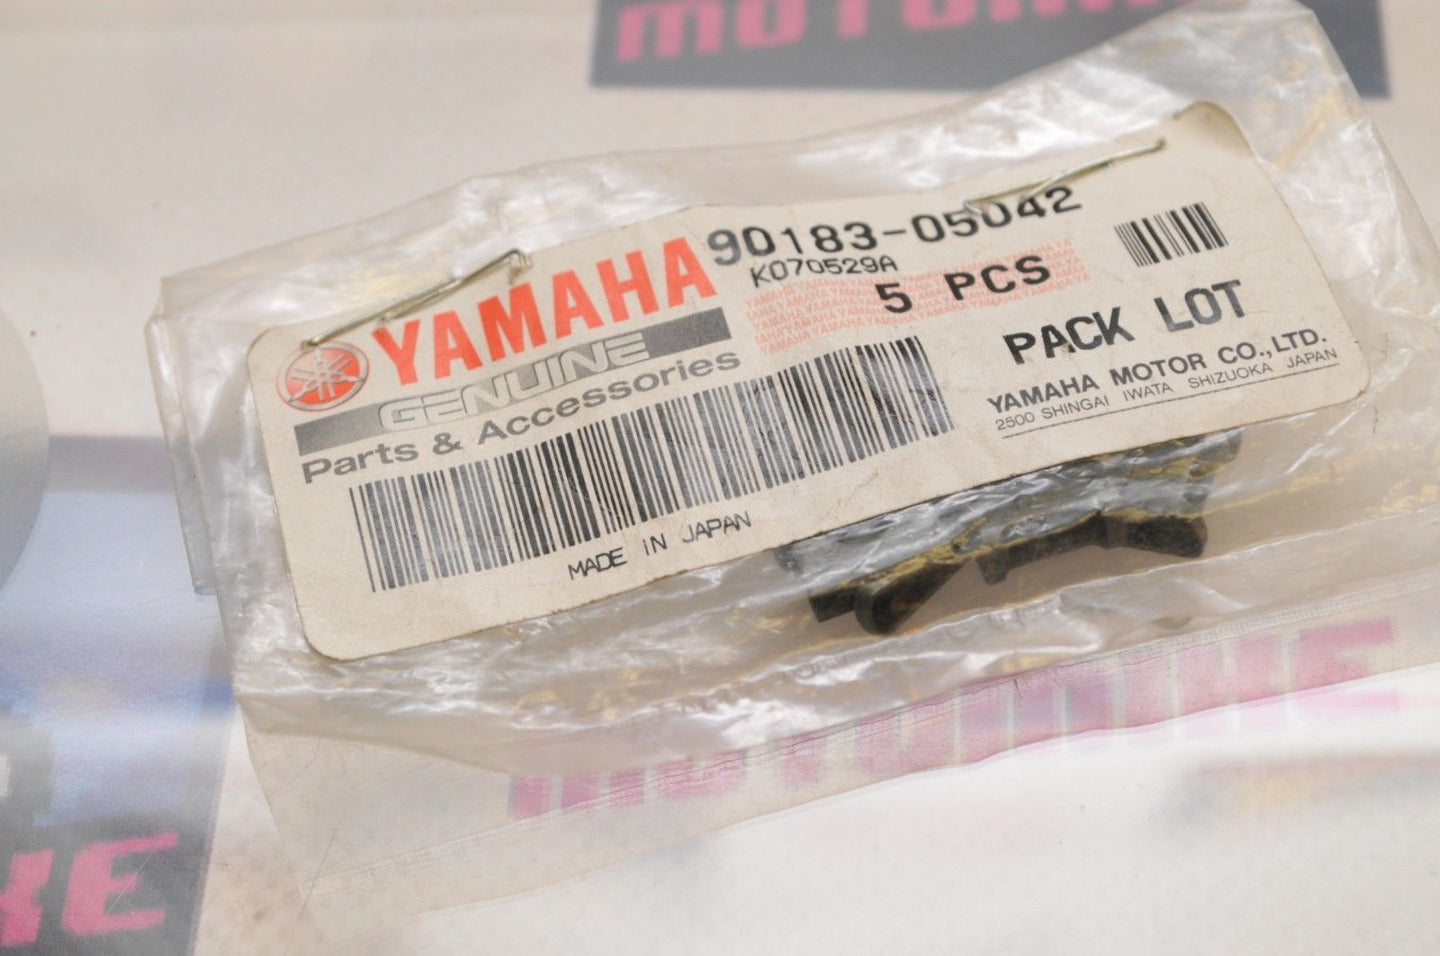 NEW NOS OEM YAMAHA 90183-05042 Qty:5  SPRING NUT, NUTS